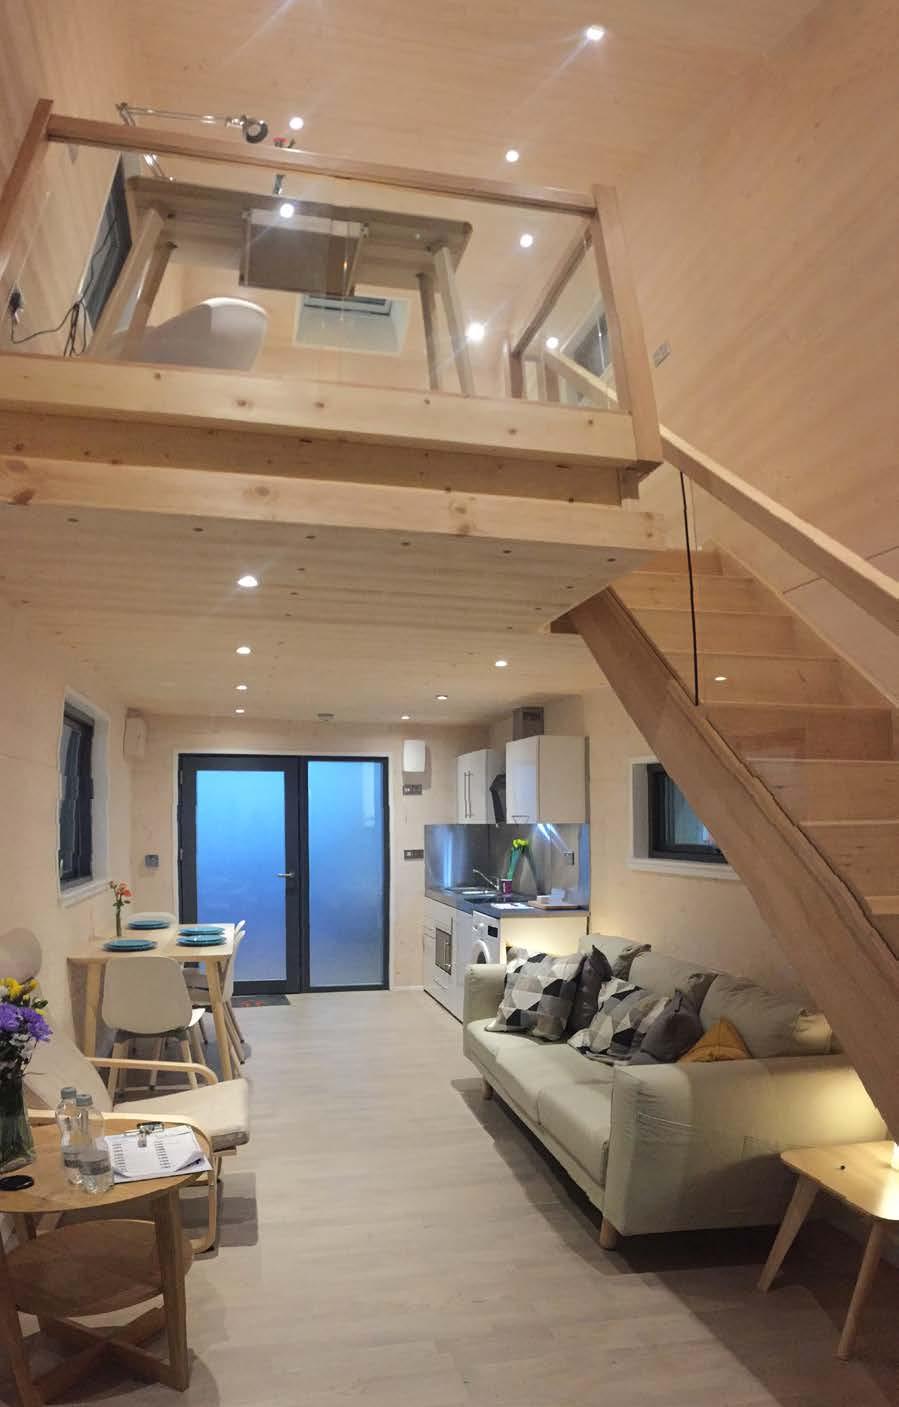 Stairs leading to a large mezzanine floor area with loft style double